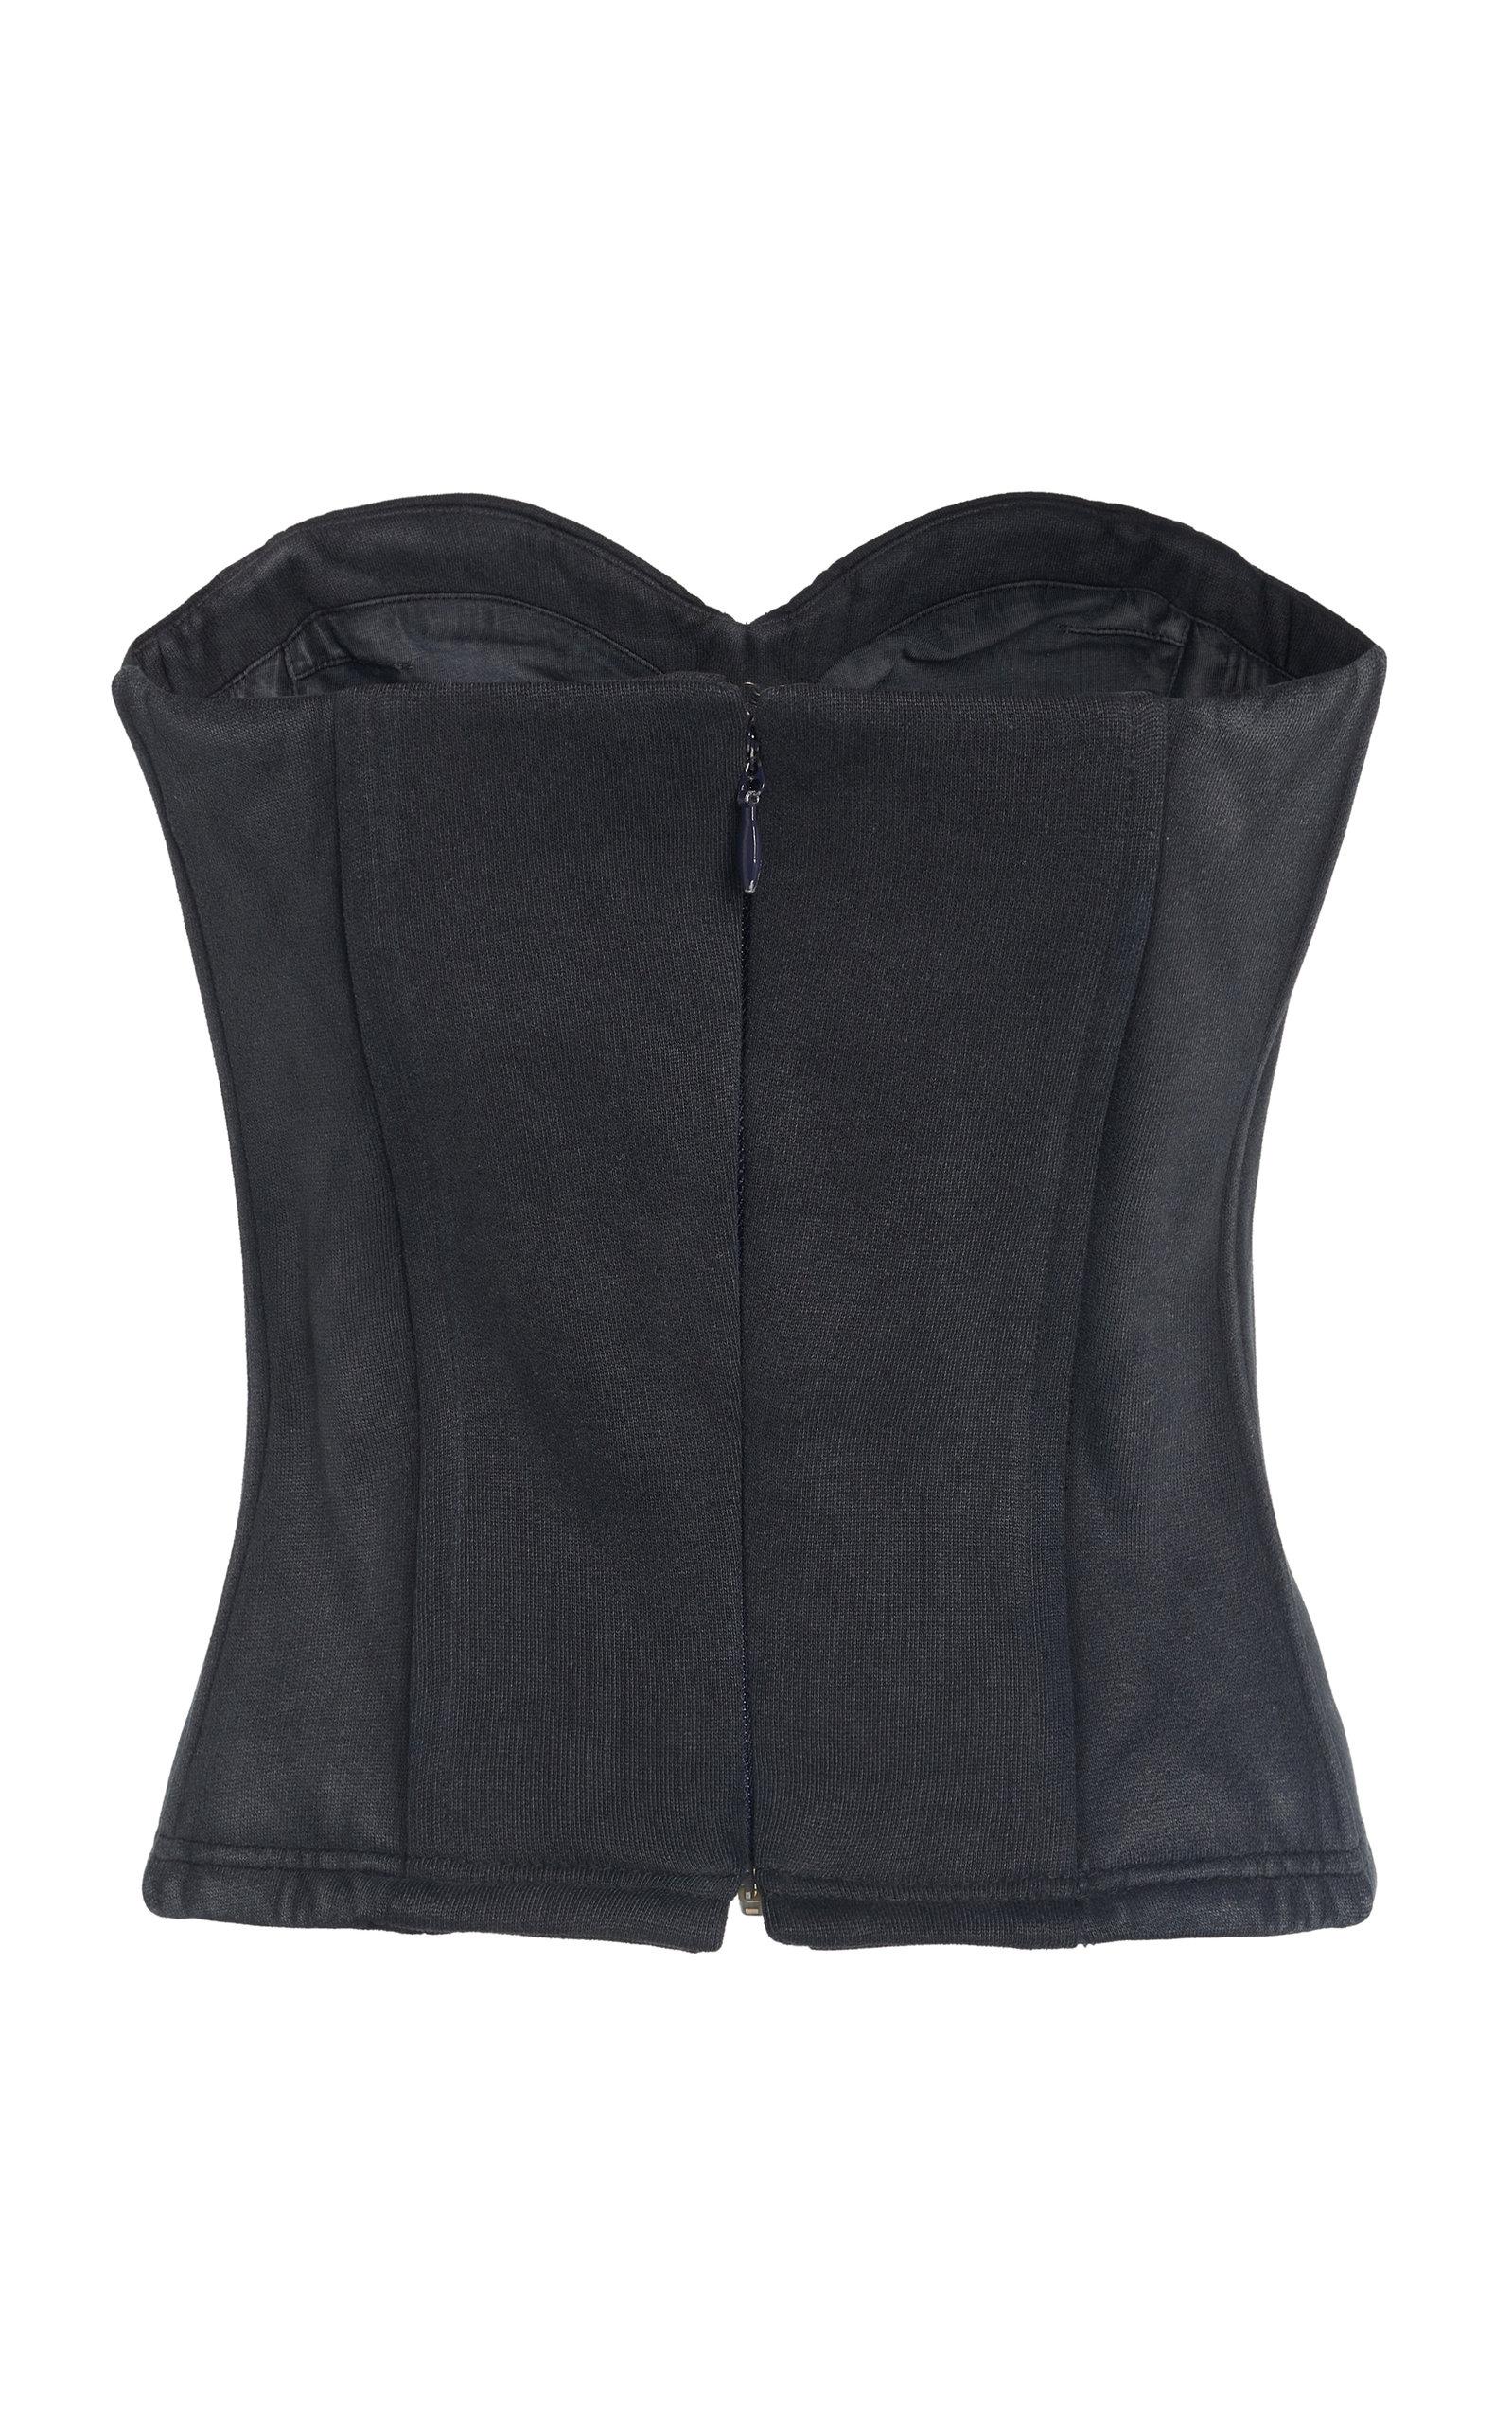 Balenciaga Strapless Washed Cotton Bustier Top in Black | Lyst